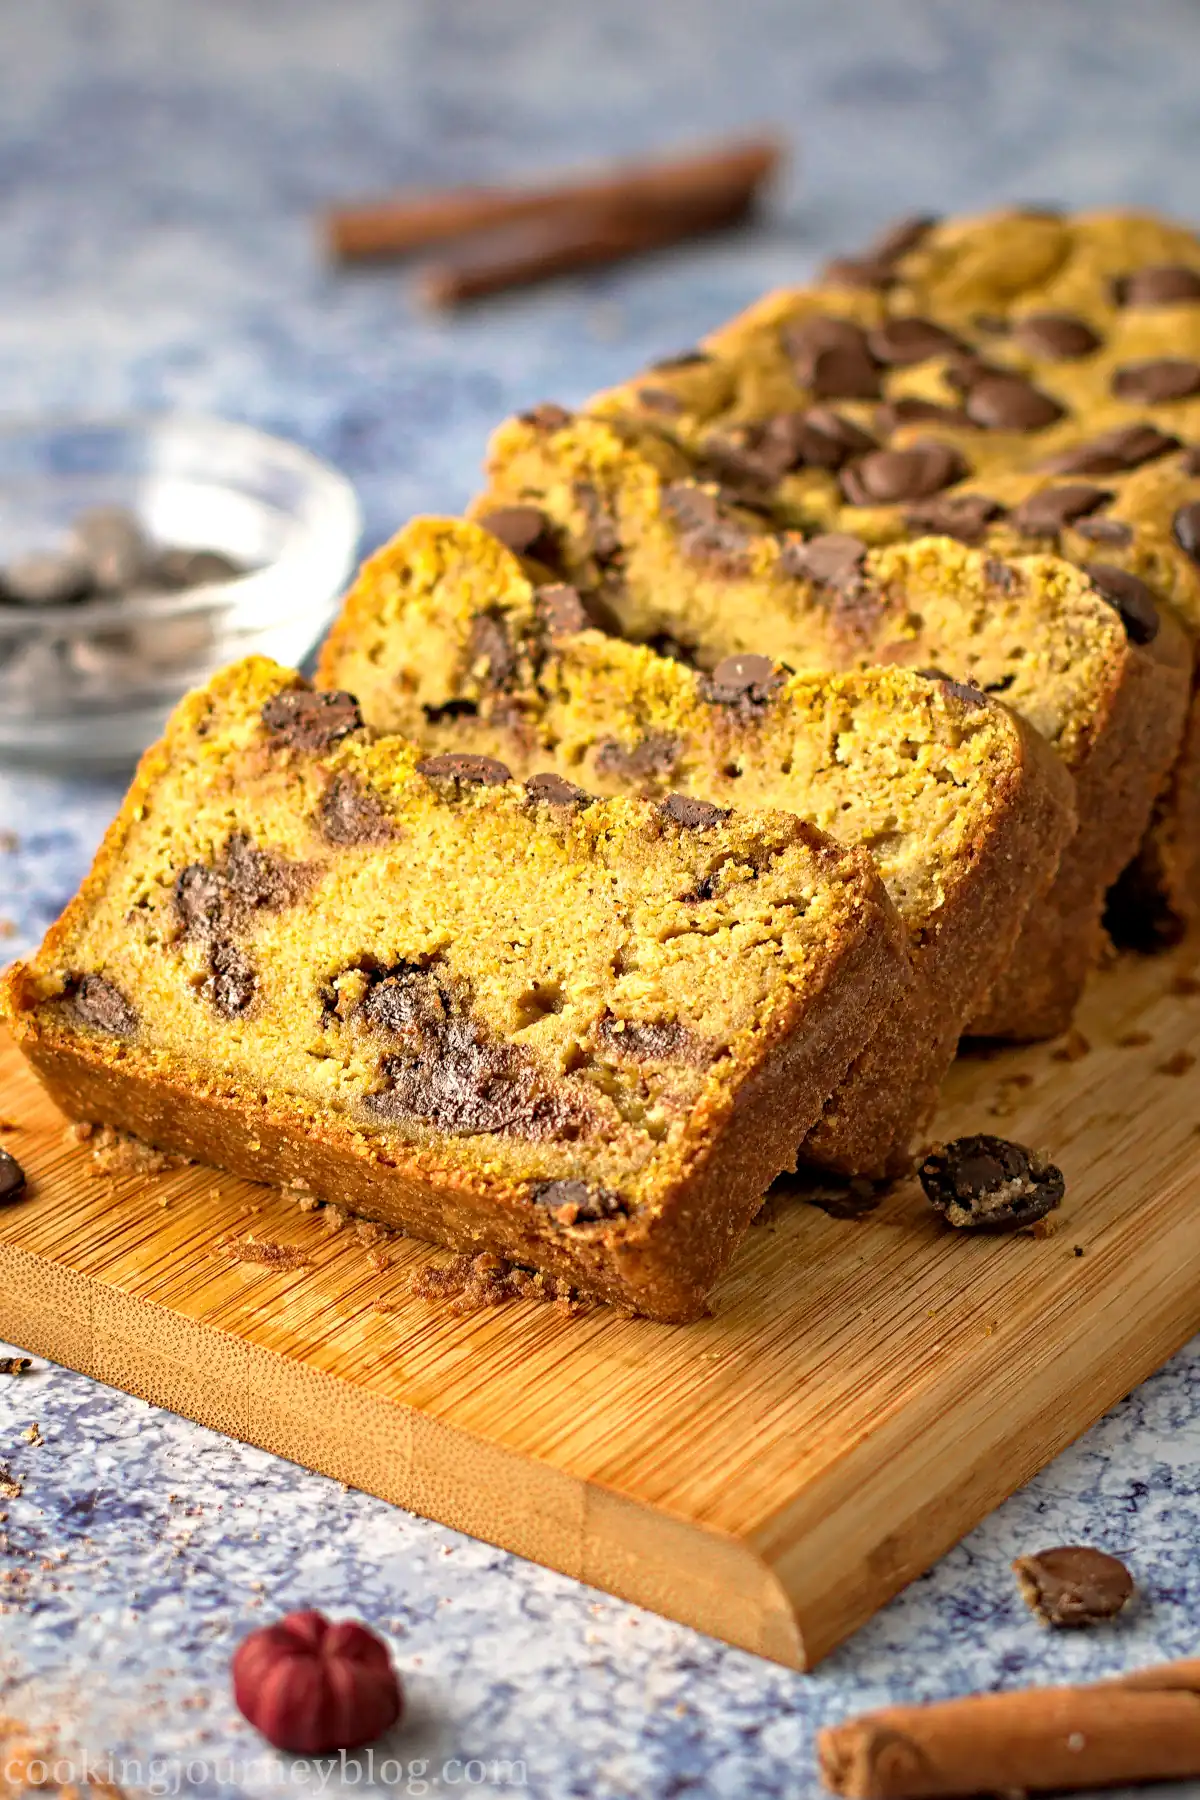 Sliced pumpkin chocolate chip bread served on a wooden board with extra chocolate chips.